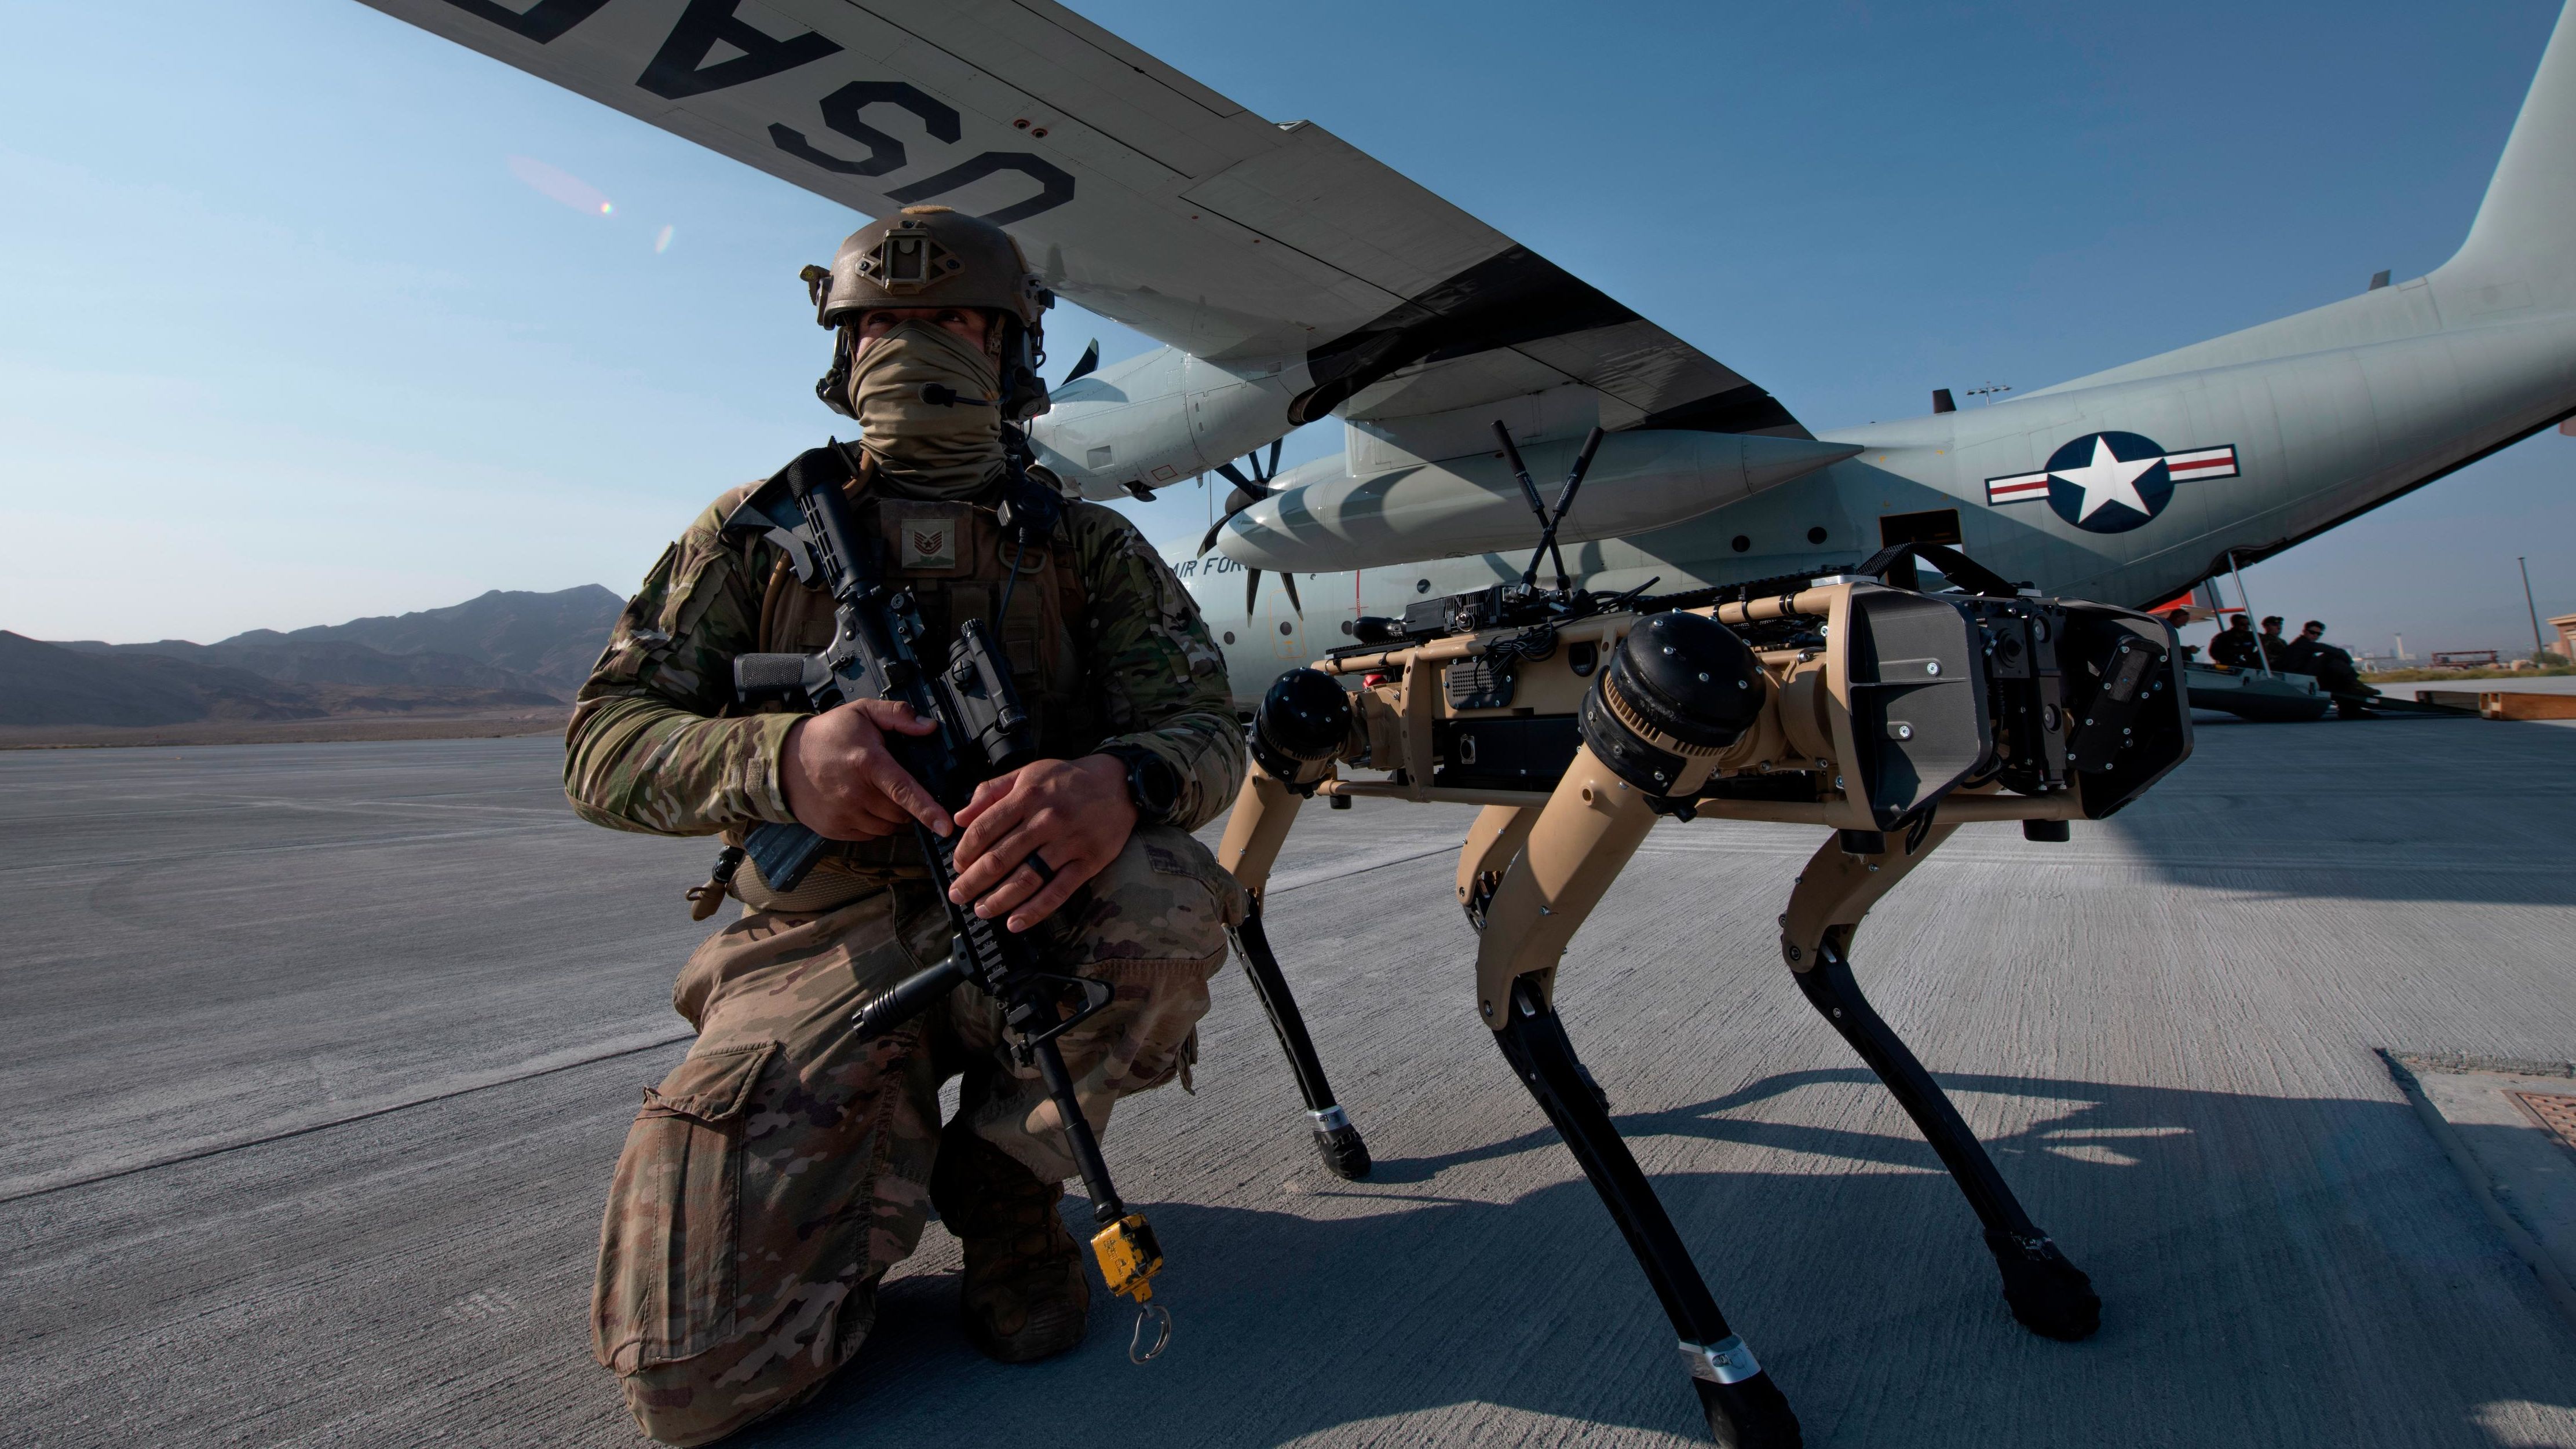 US Air Force Tech. Sgt. John Rodiguez provides security with a Ghost Robotics Vision 60 prototype during an exercises on Nellis Air Force Base in Nevada.